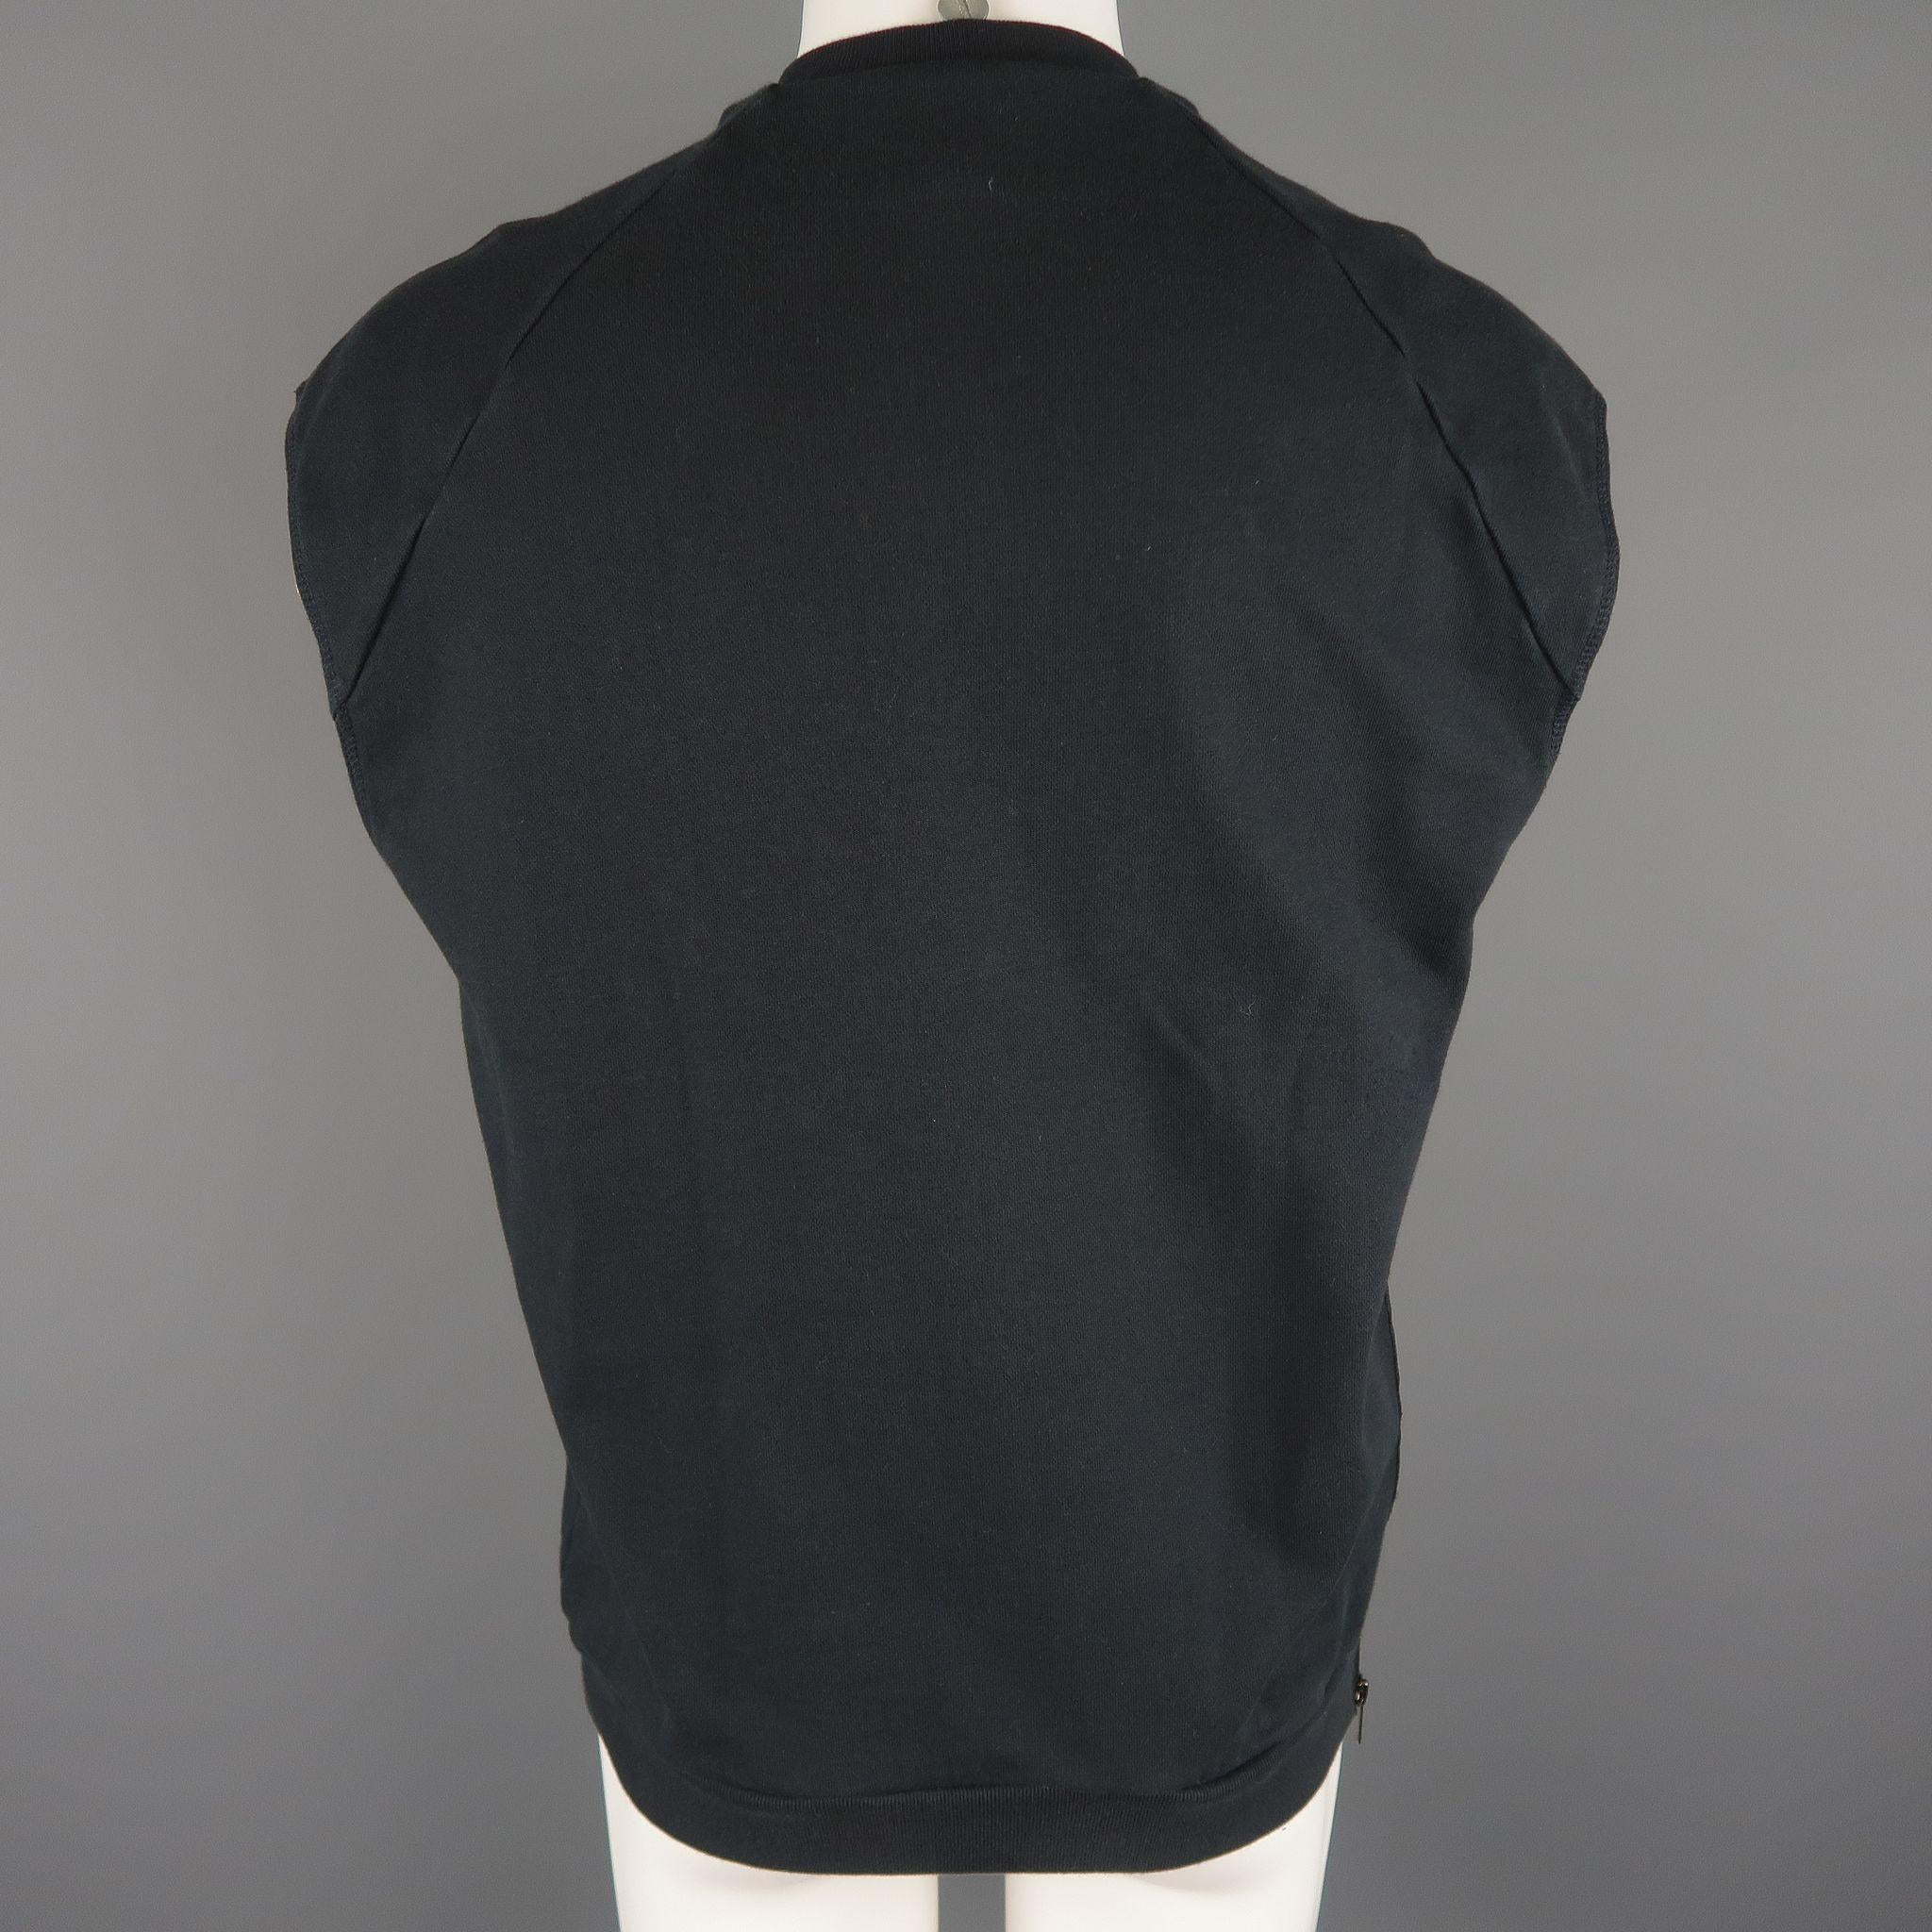 Men's 3.1 PHILLIP LIM Size XS Black Embroidery Cotton Sleeveless Pullover Sweater